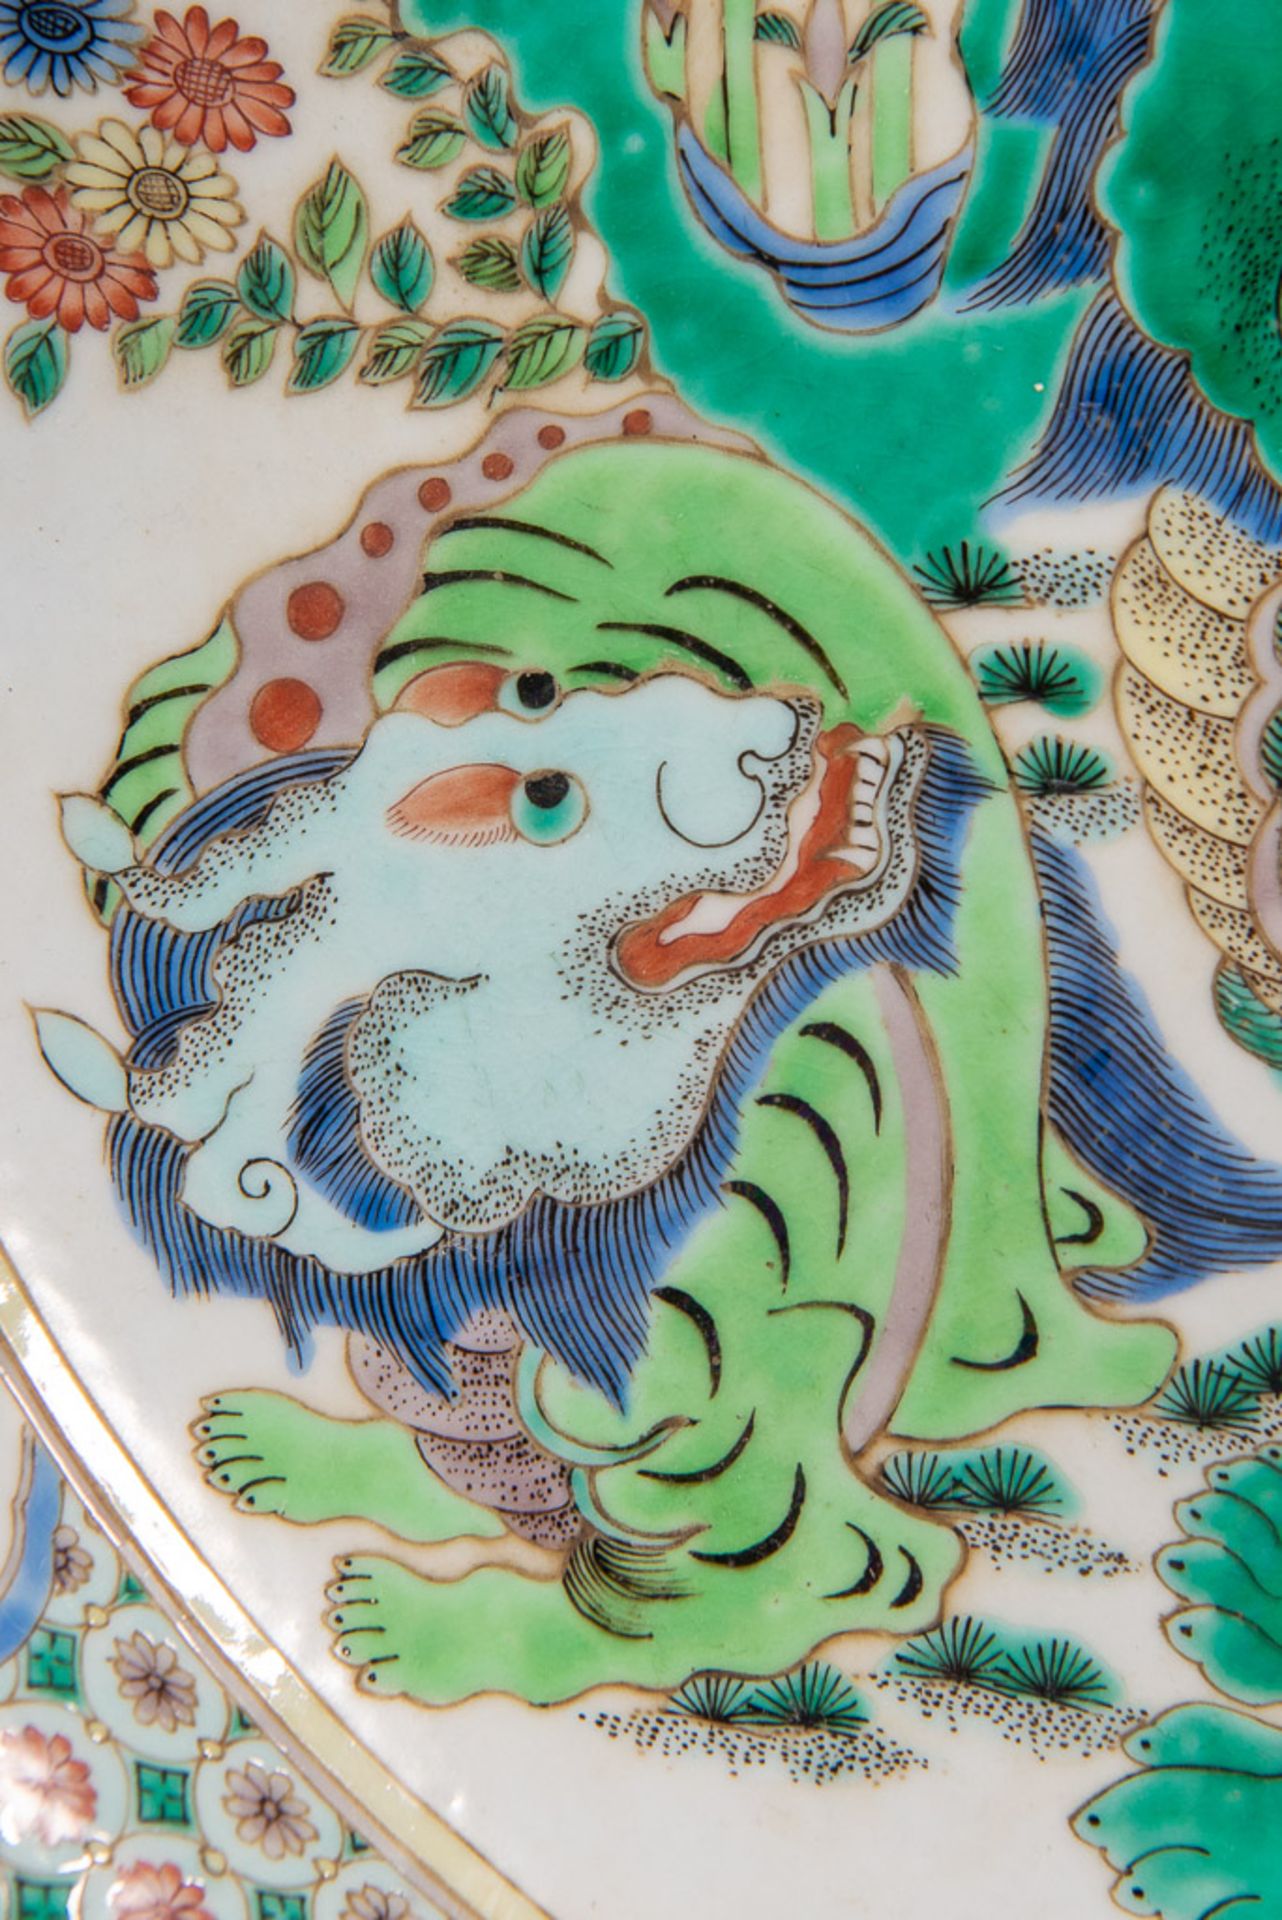 Display plate Wucai with dragons - Image 7 of 12